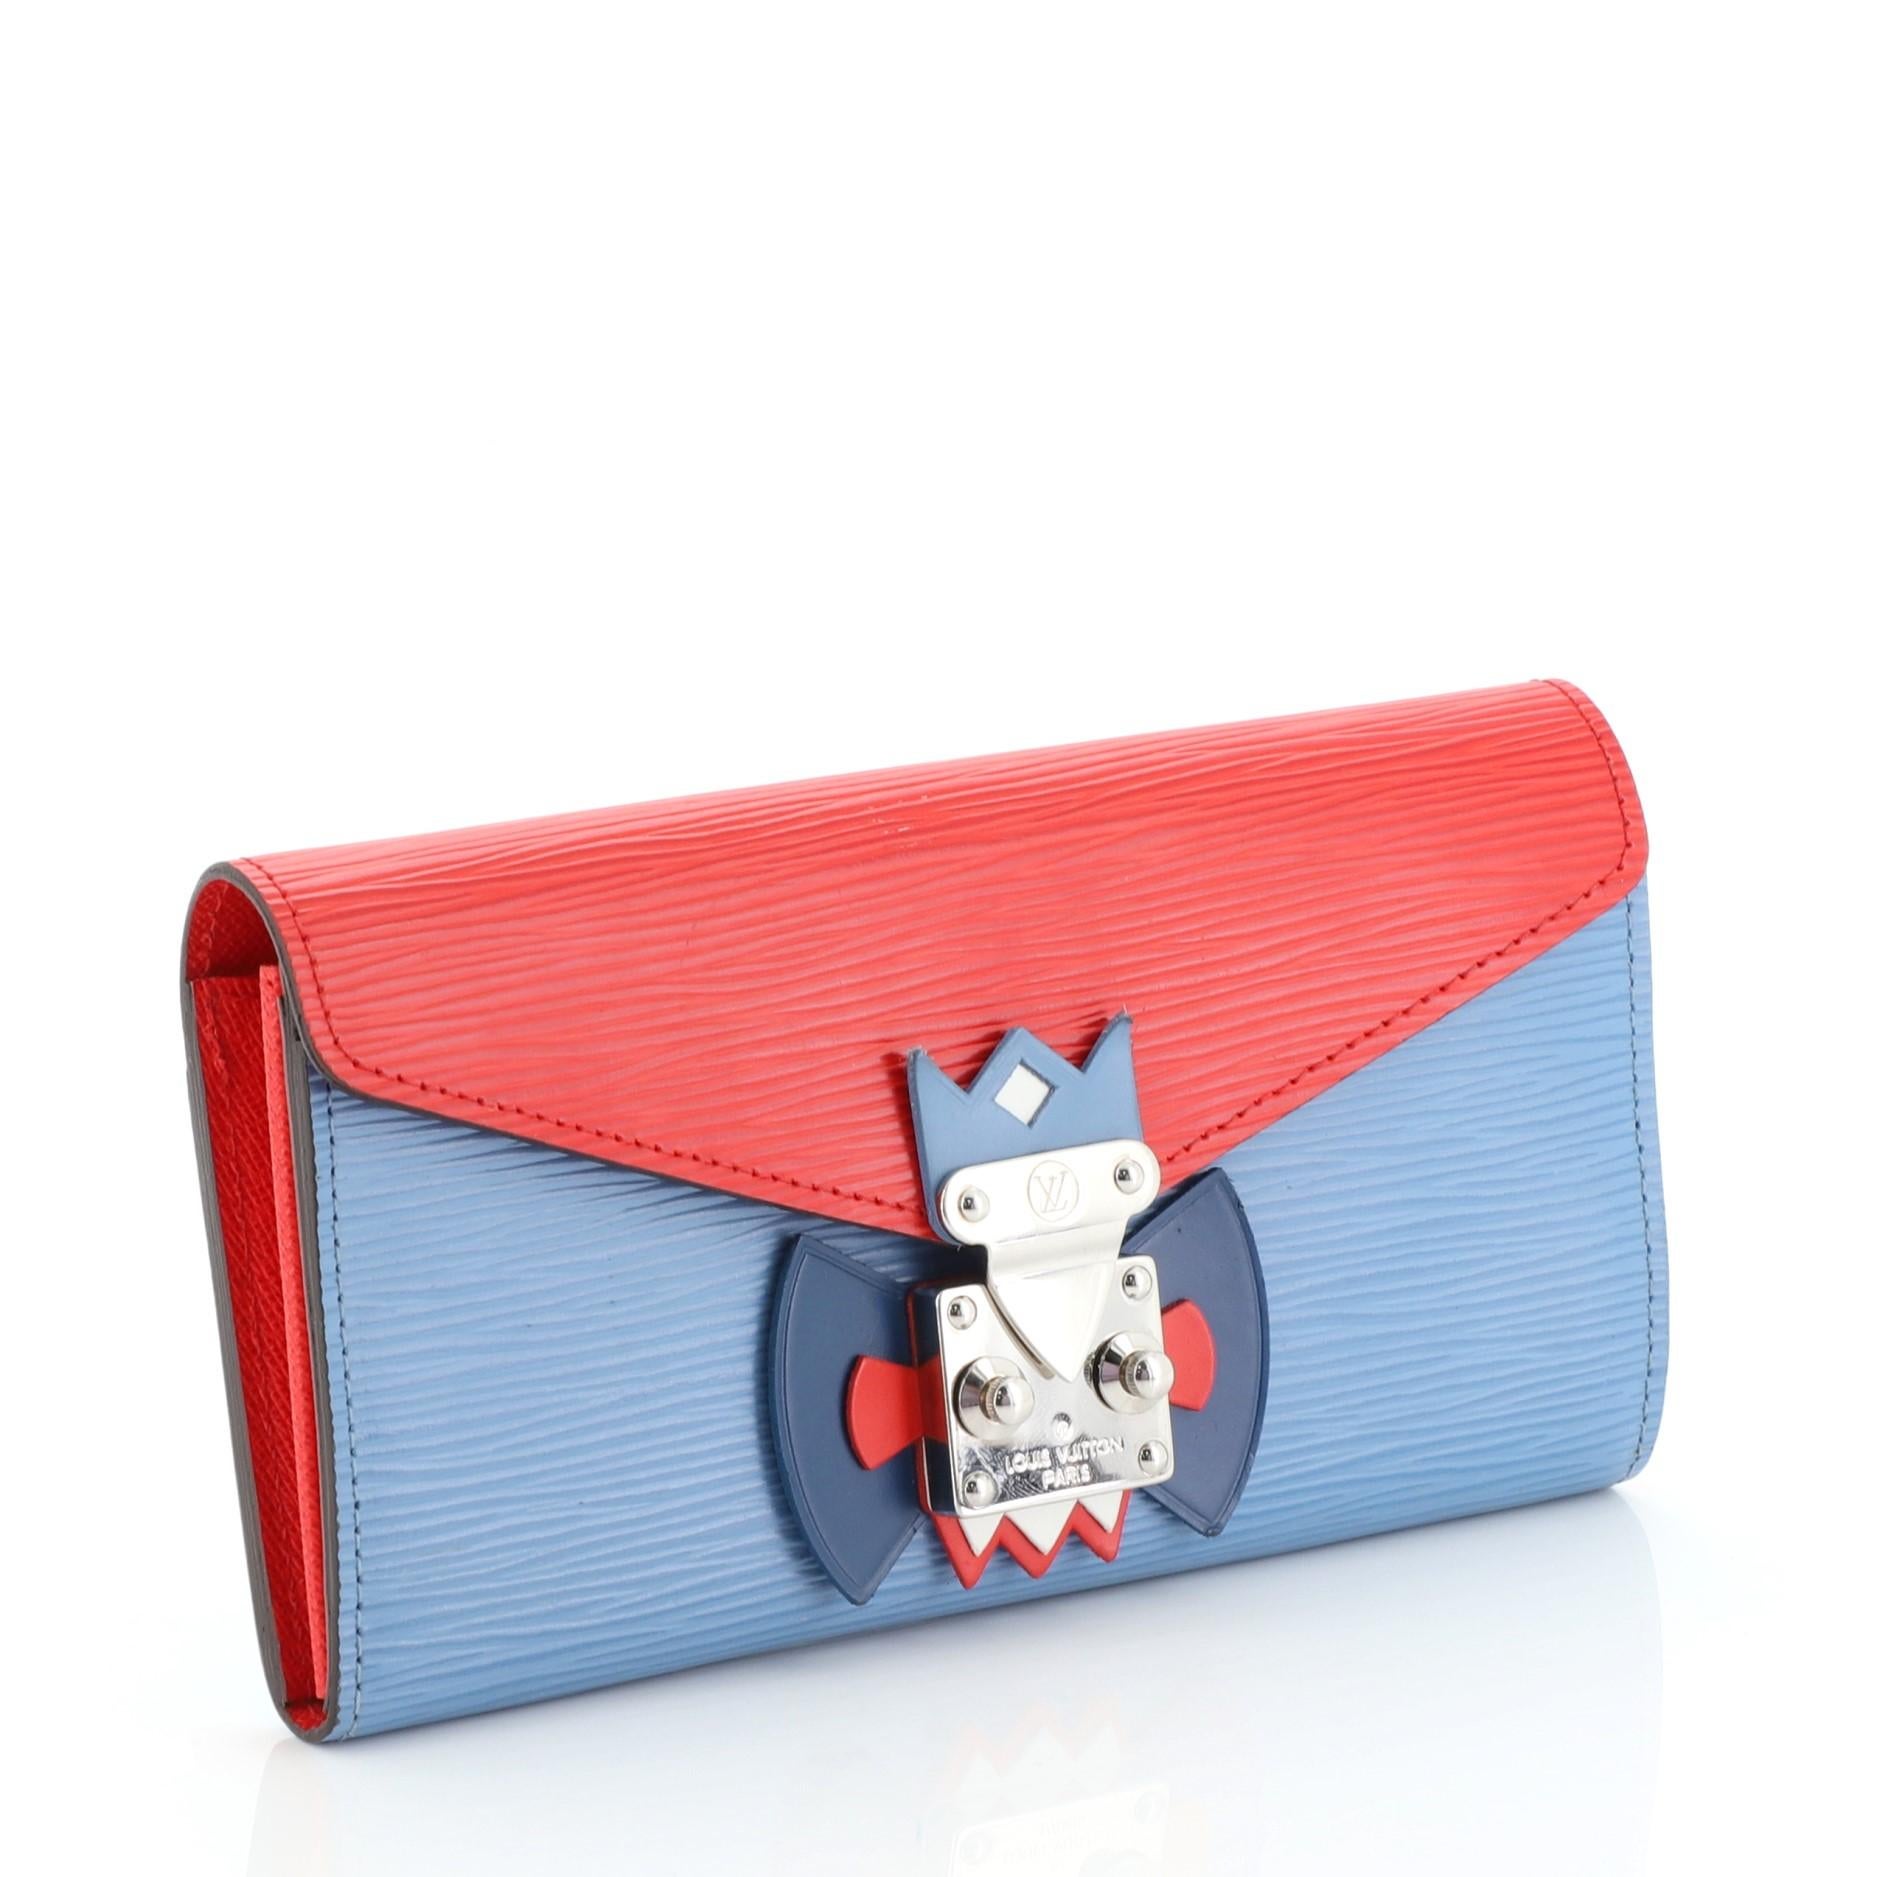 This Louis Vuitton Tribal Mask Sarah Wallet Epi Leather, crafted in blue and red epi leather, features tribal mask design on front, envelope shape flap and silver-tone hardware. Its S-lock closure opens to a red leather interior with multiple card